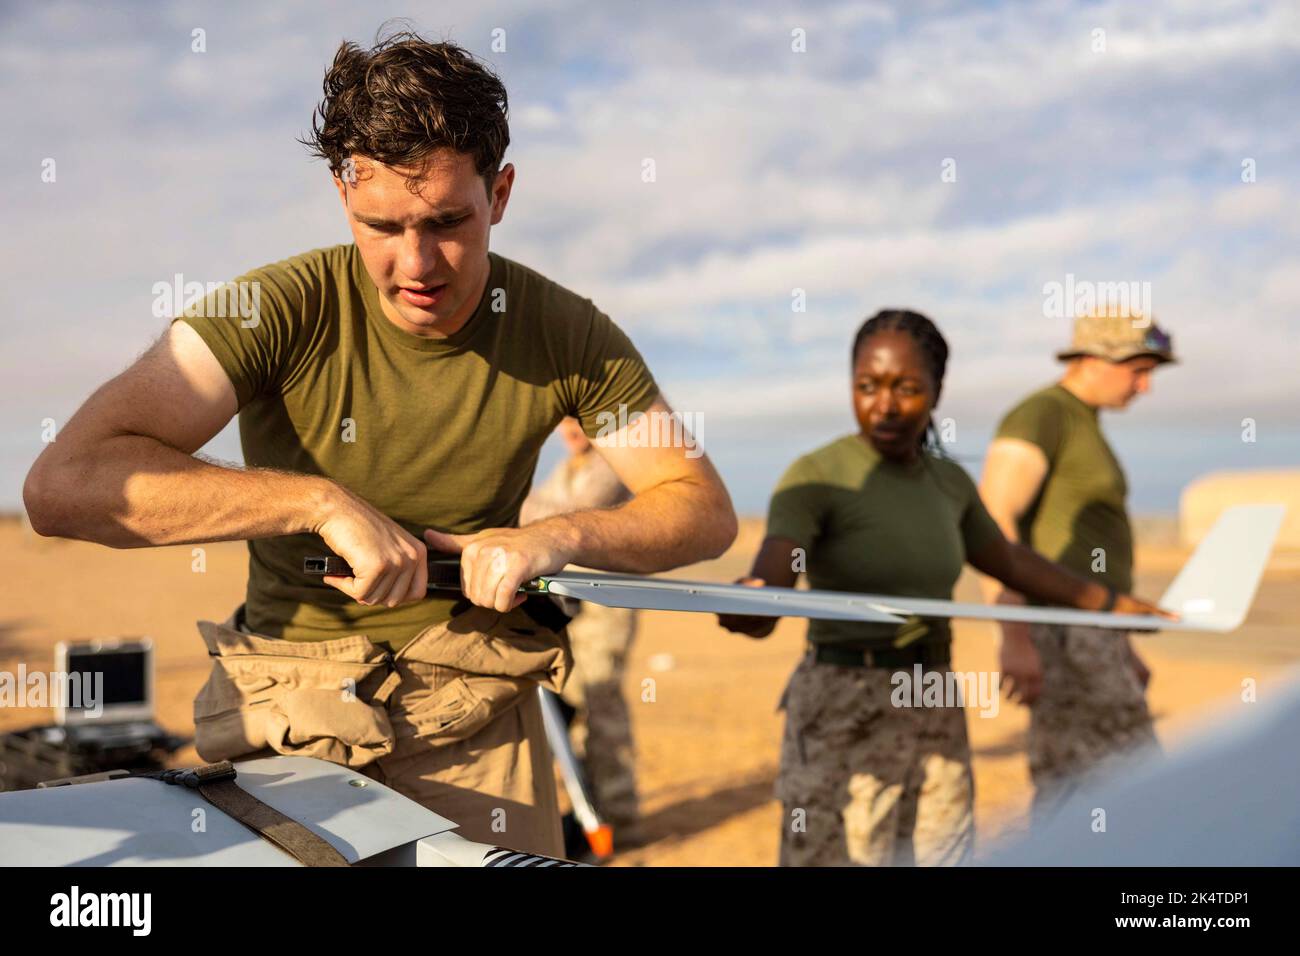 Arizona, USA. 21st Sep, 2022. U.S. Marine Corps Sgt. Johnny Scantland from Denver, Colorado, left, and Cpl. Rijdyna Jules from Haiti, both unmanned aircraft system technicians with Marine Unmanned Aerial Vehicle Squadron 2, Marine Aircraft Group 14, 2nd Marine Aircraft Wing, prepares a U.S. Marine Corps RQ-21A Blackjack for launch during Weapons and Tactics Instructors (WTI) course 1-23 at Canon Air Defense Complex (P111), near Yuma, Arizona, Sept. 21, 2022. The Weapons and Tactics Instructor course is a seven-week training event hosted by Marine Aviation Weapons and Tactics Squadron On Stock Photo